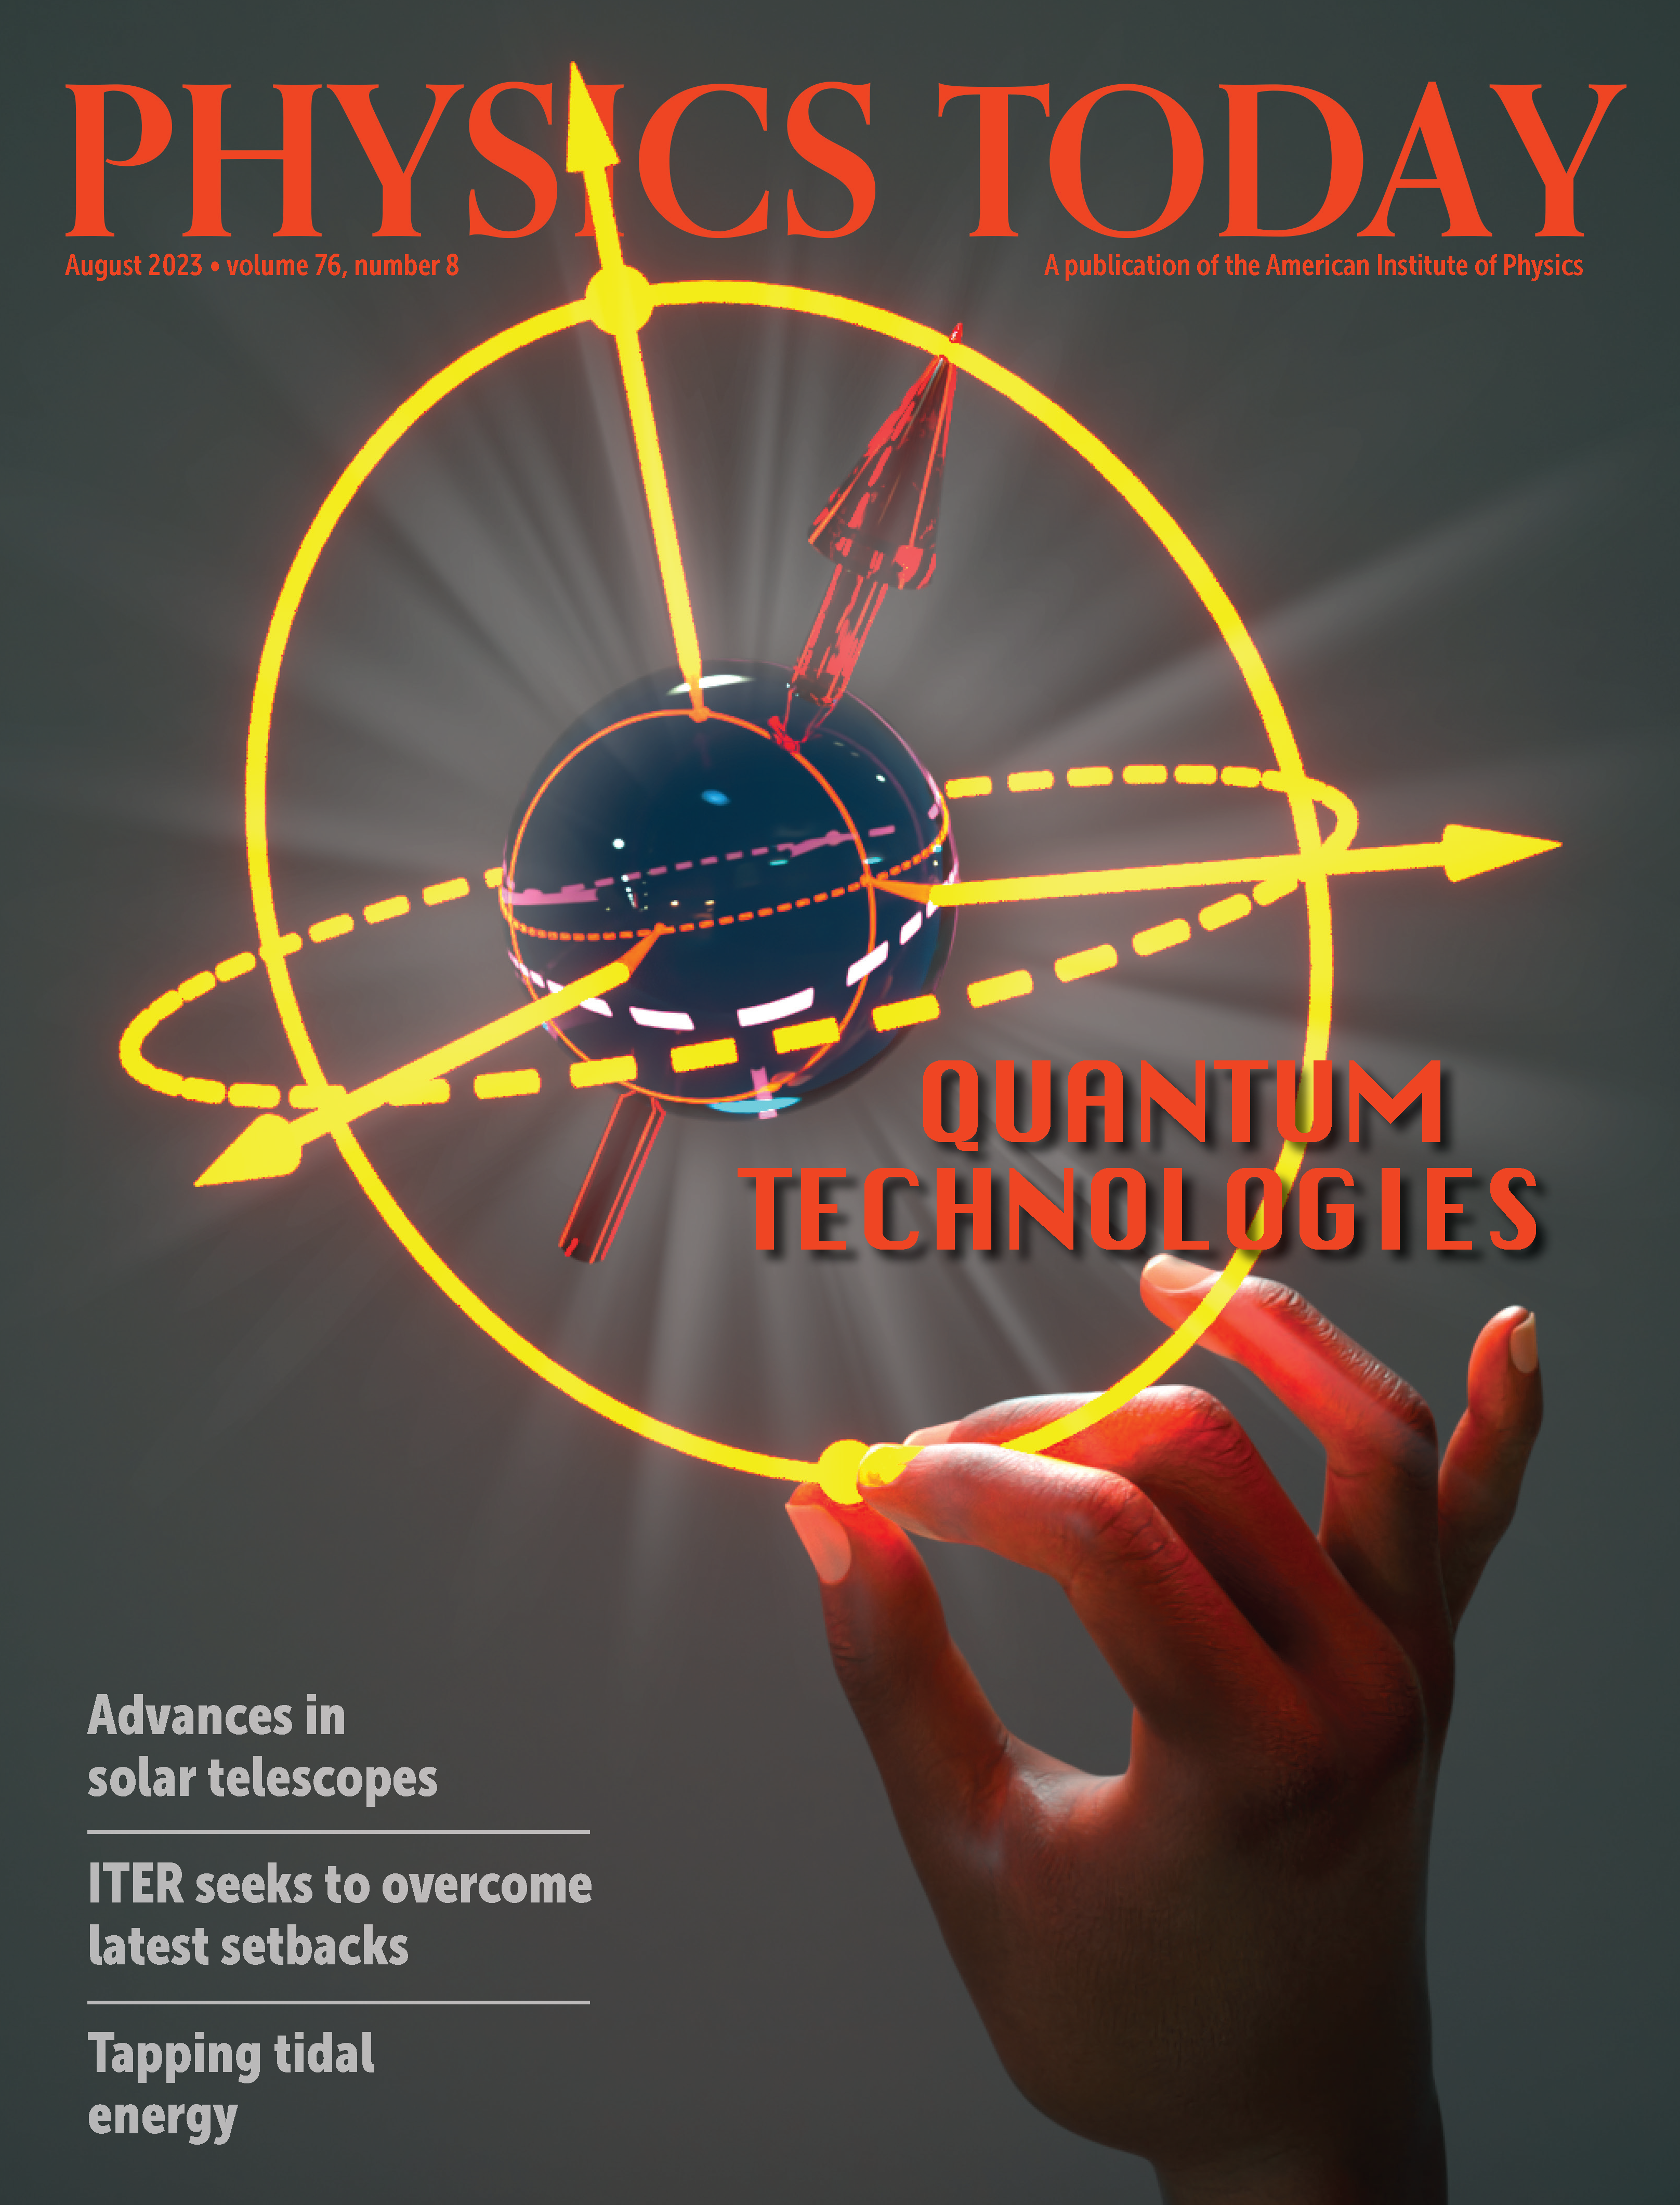 August 2023 Physics Today cover